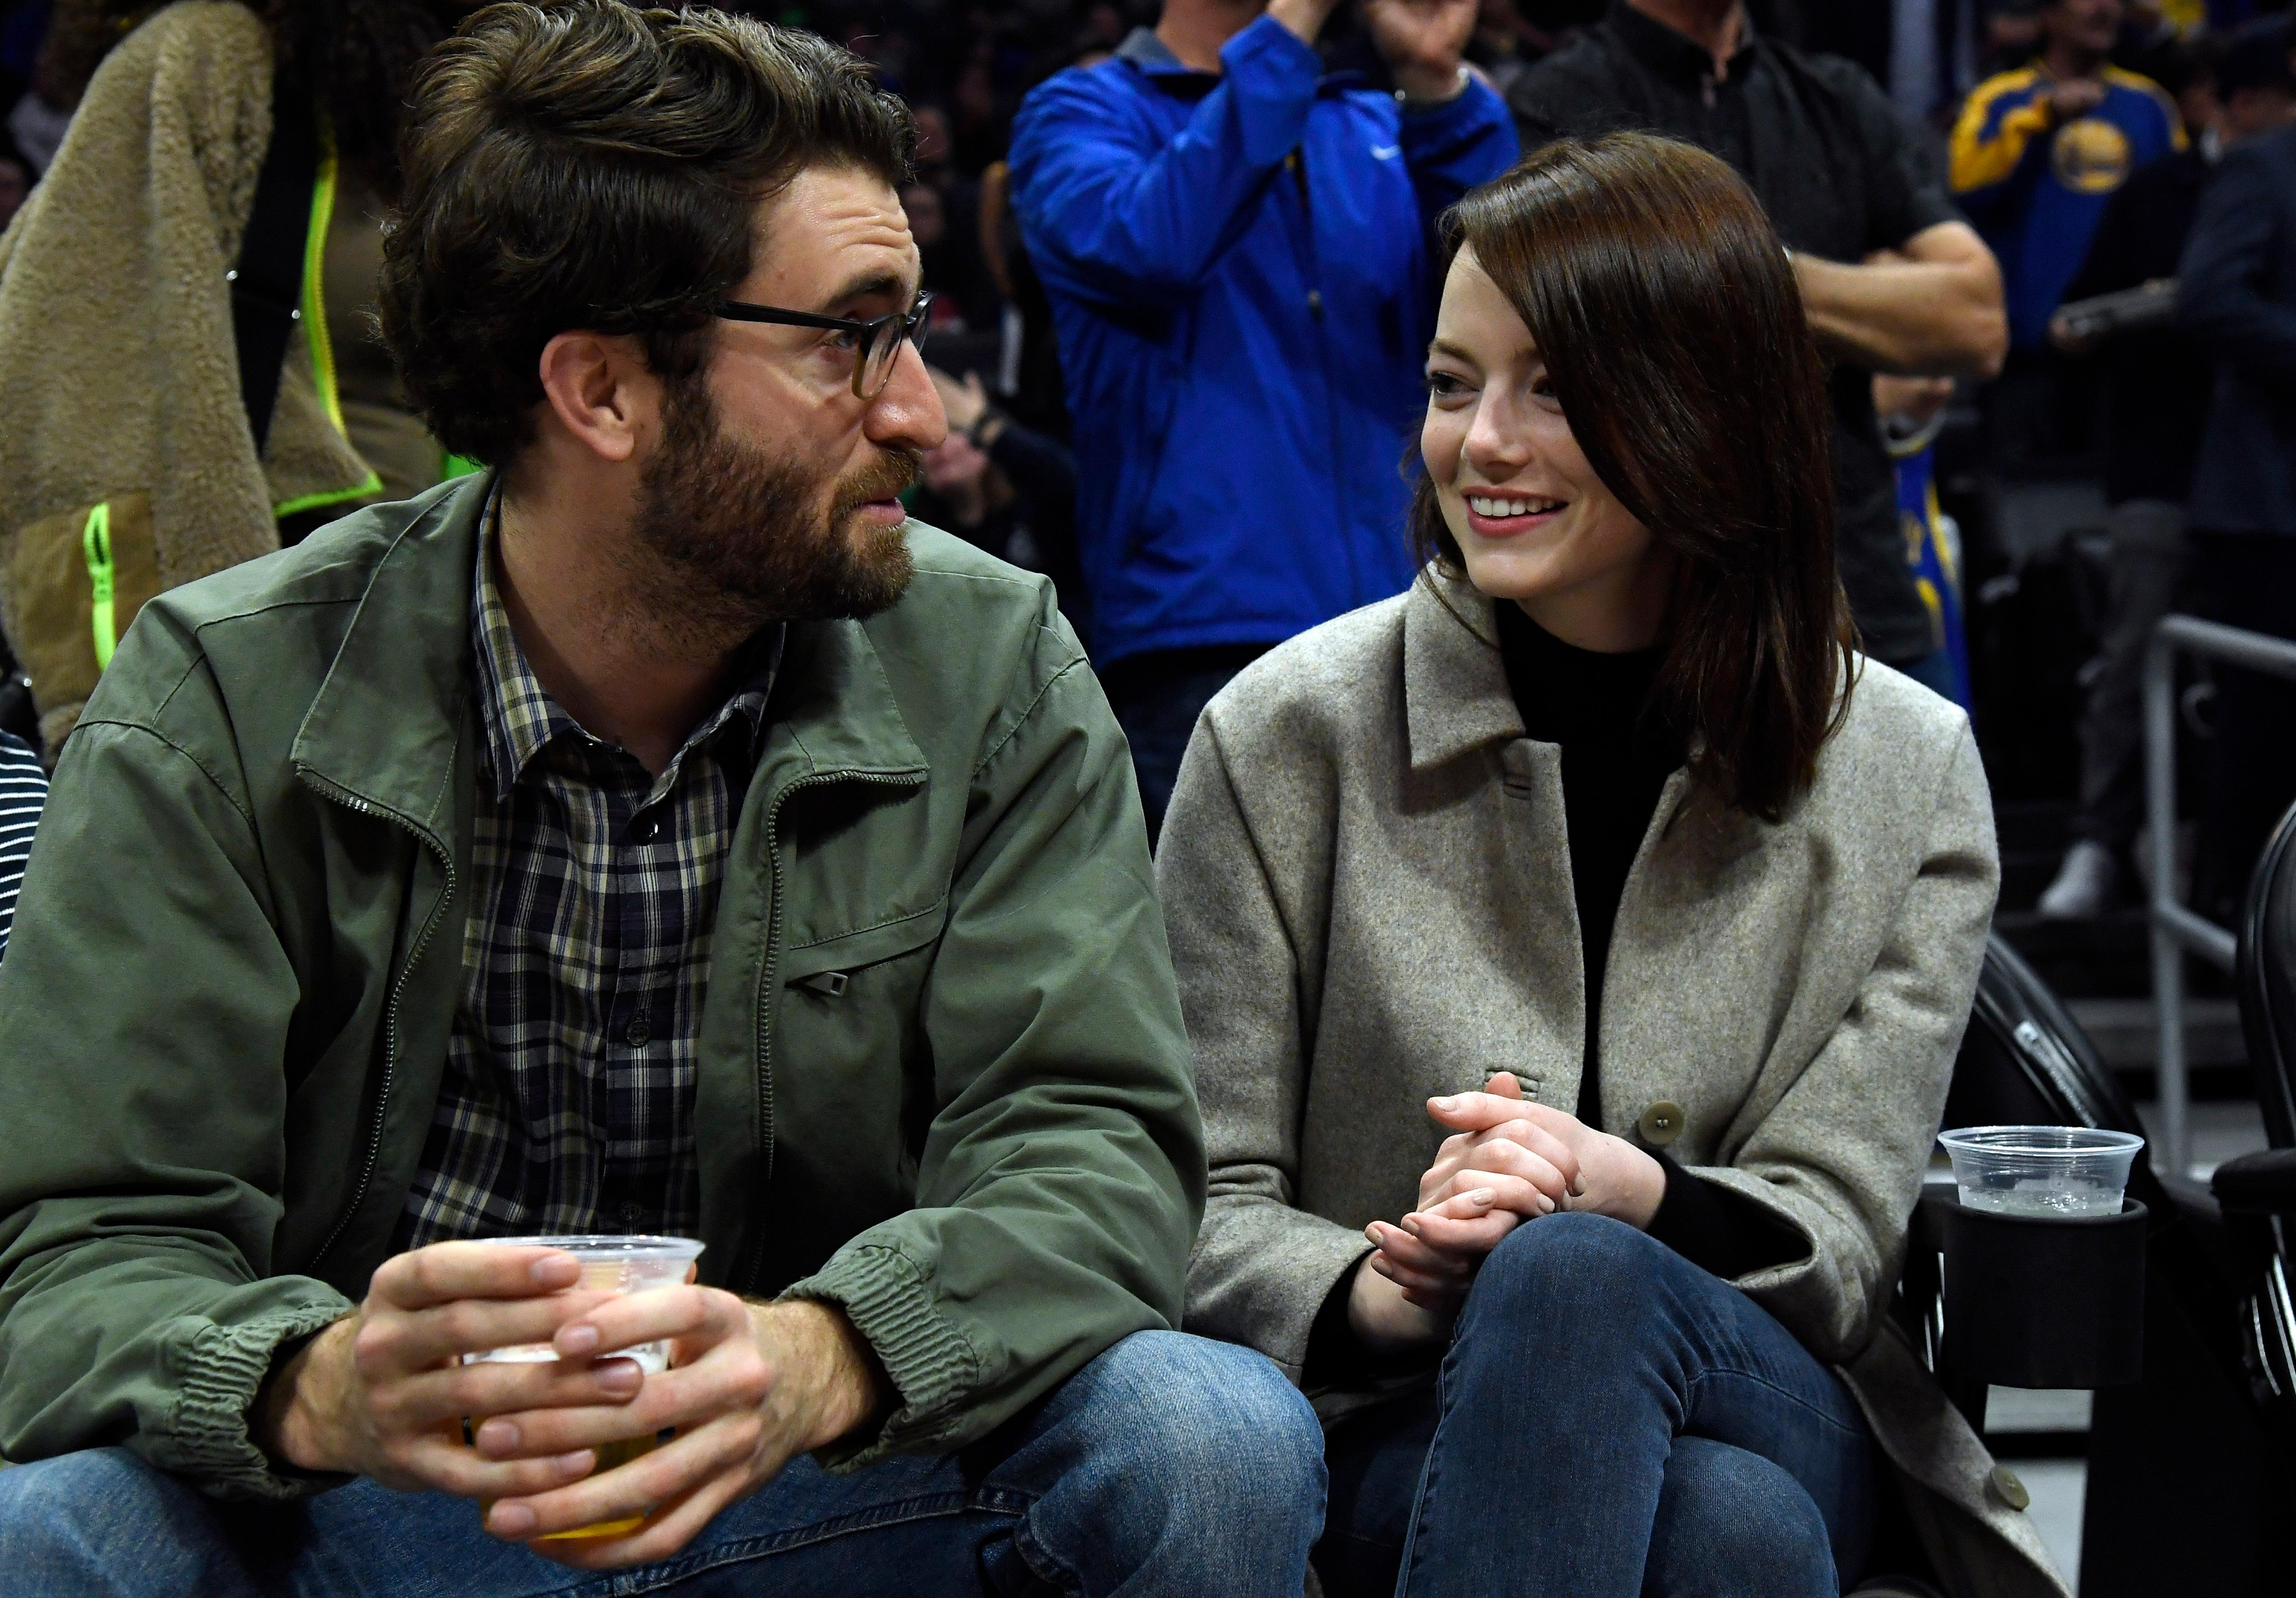 Emma Stone and Dave McCary's wedding date is approaching